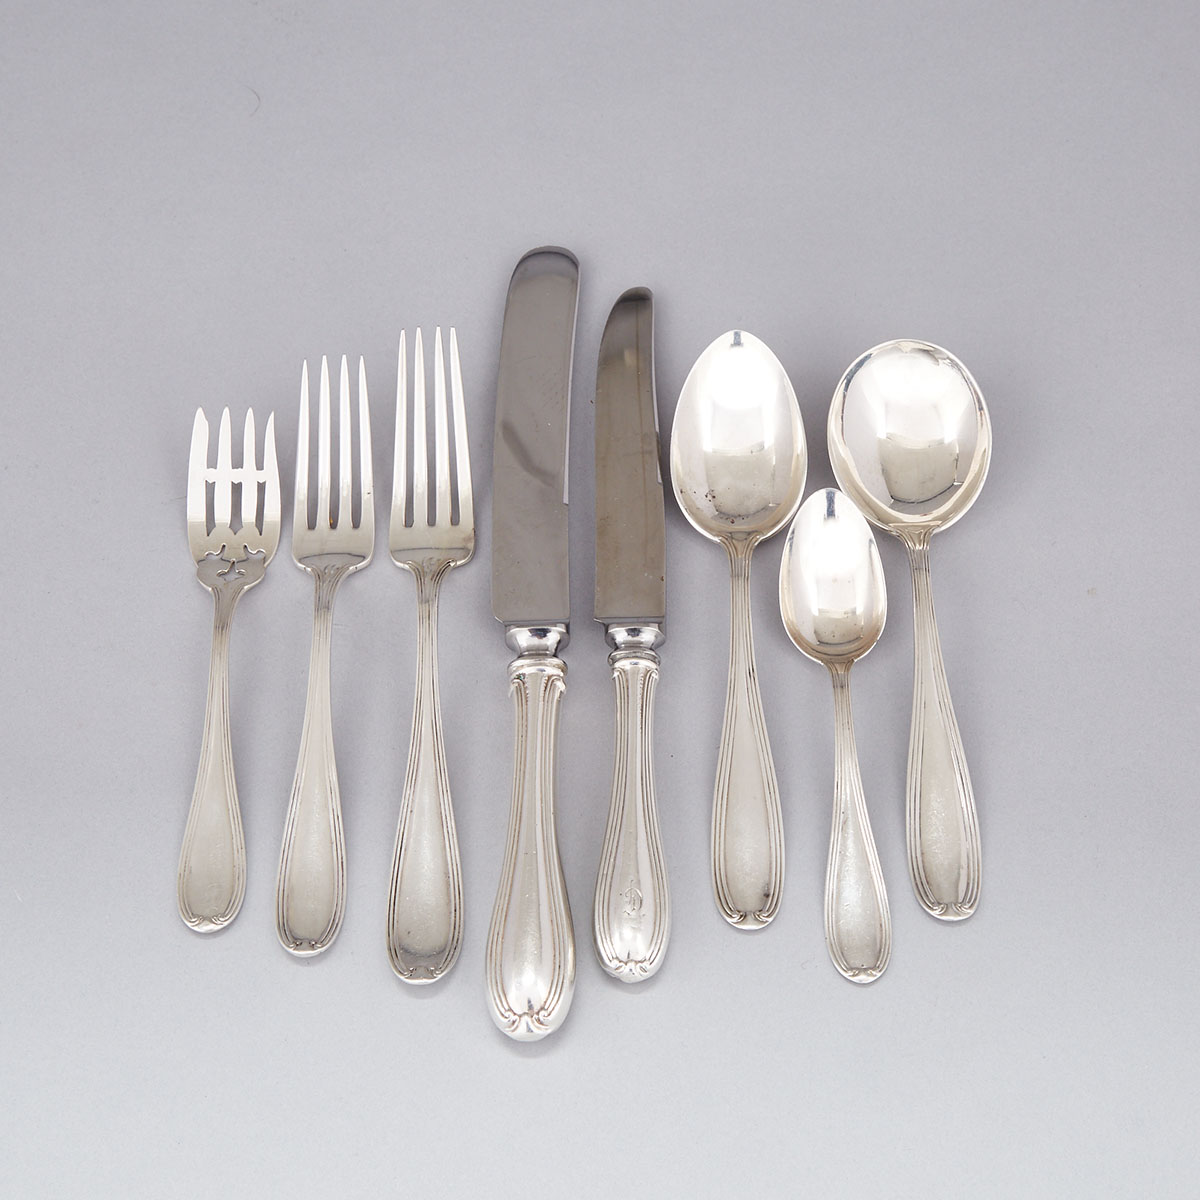 Canadian Silver ‘Stratford’ Pattern Flatware Service, Roden Bros., Toronto, Ont., early 20th century